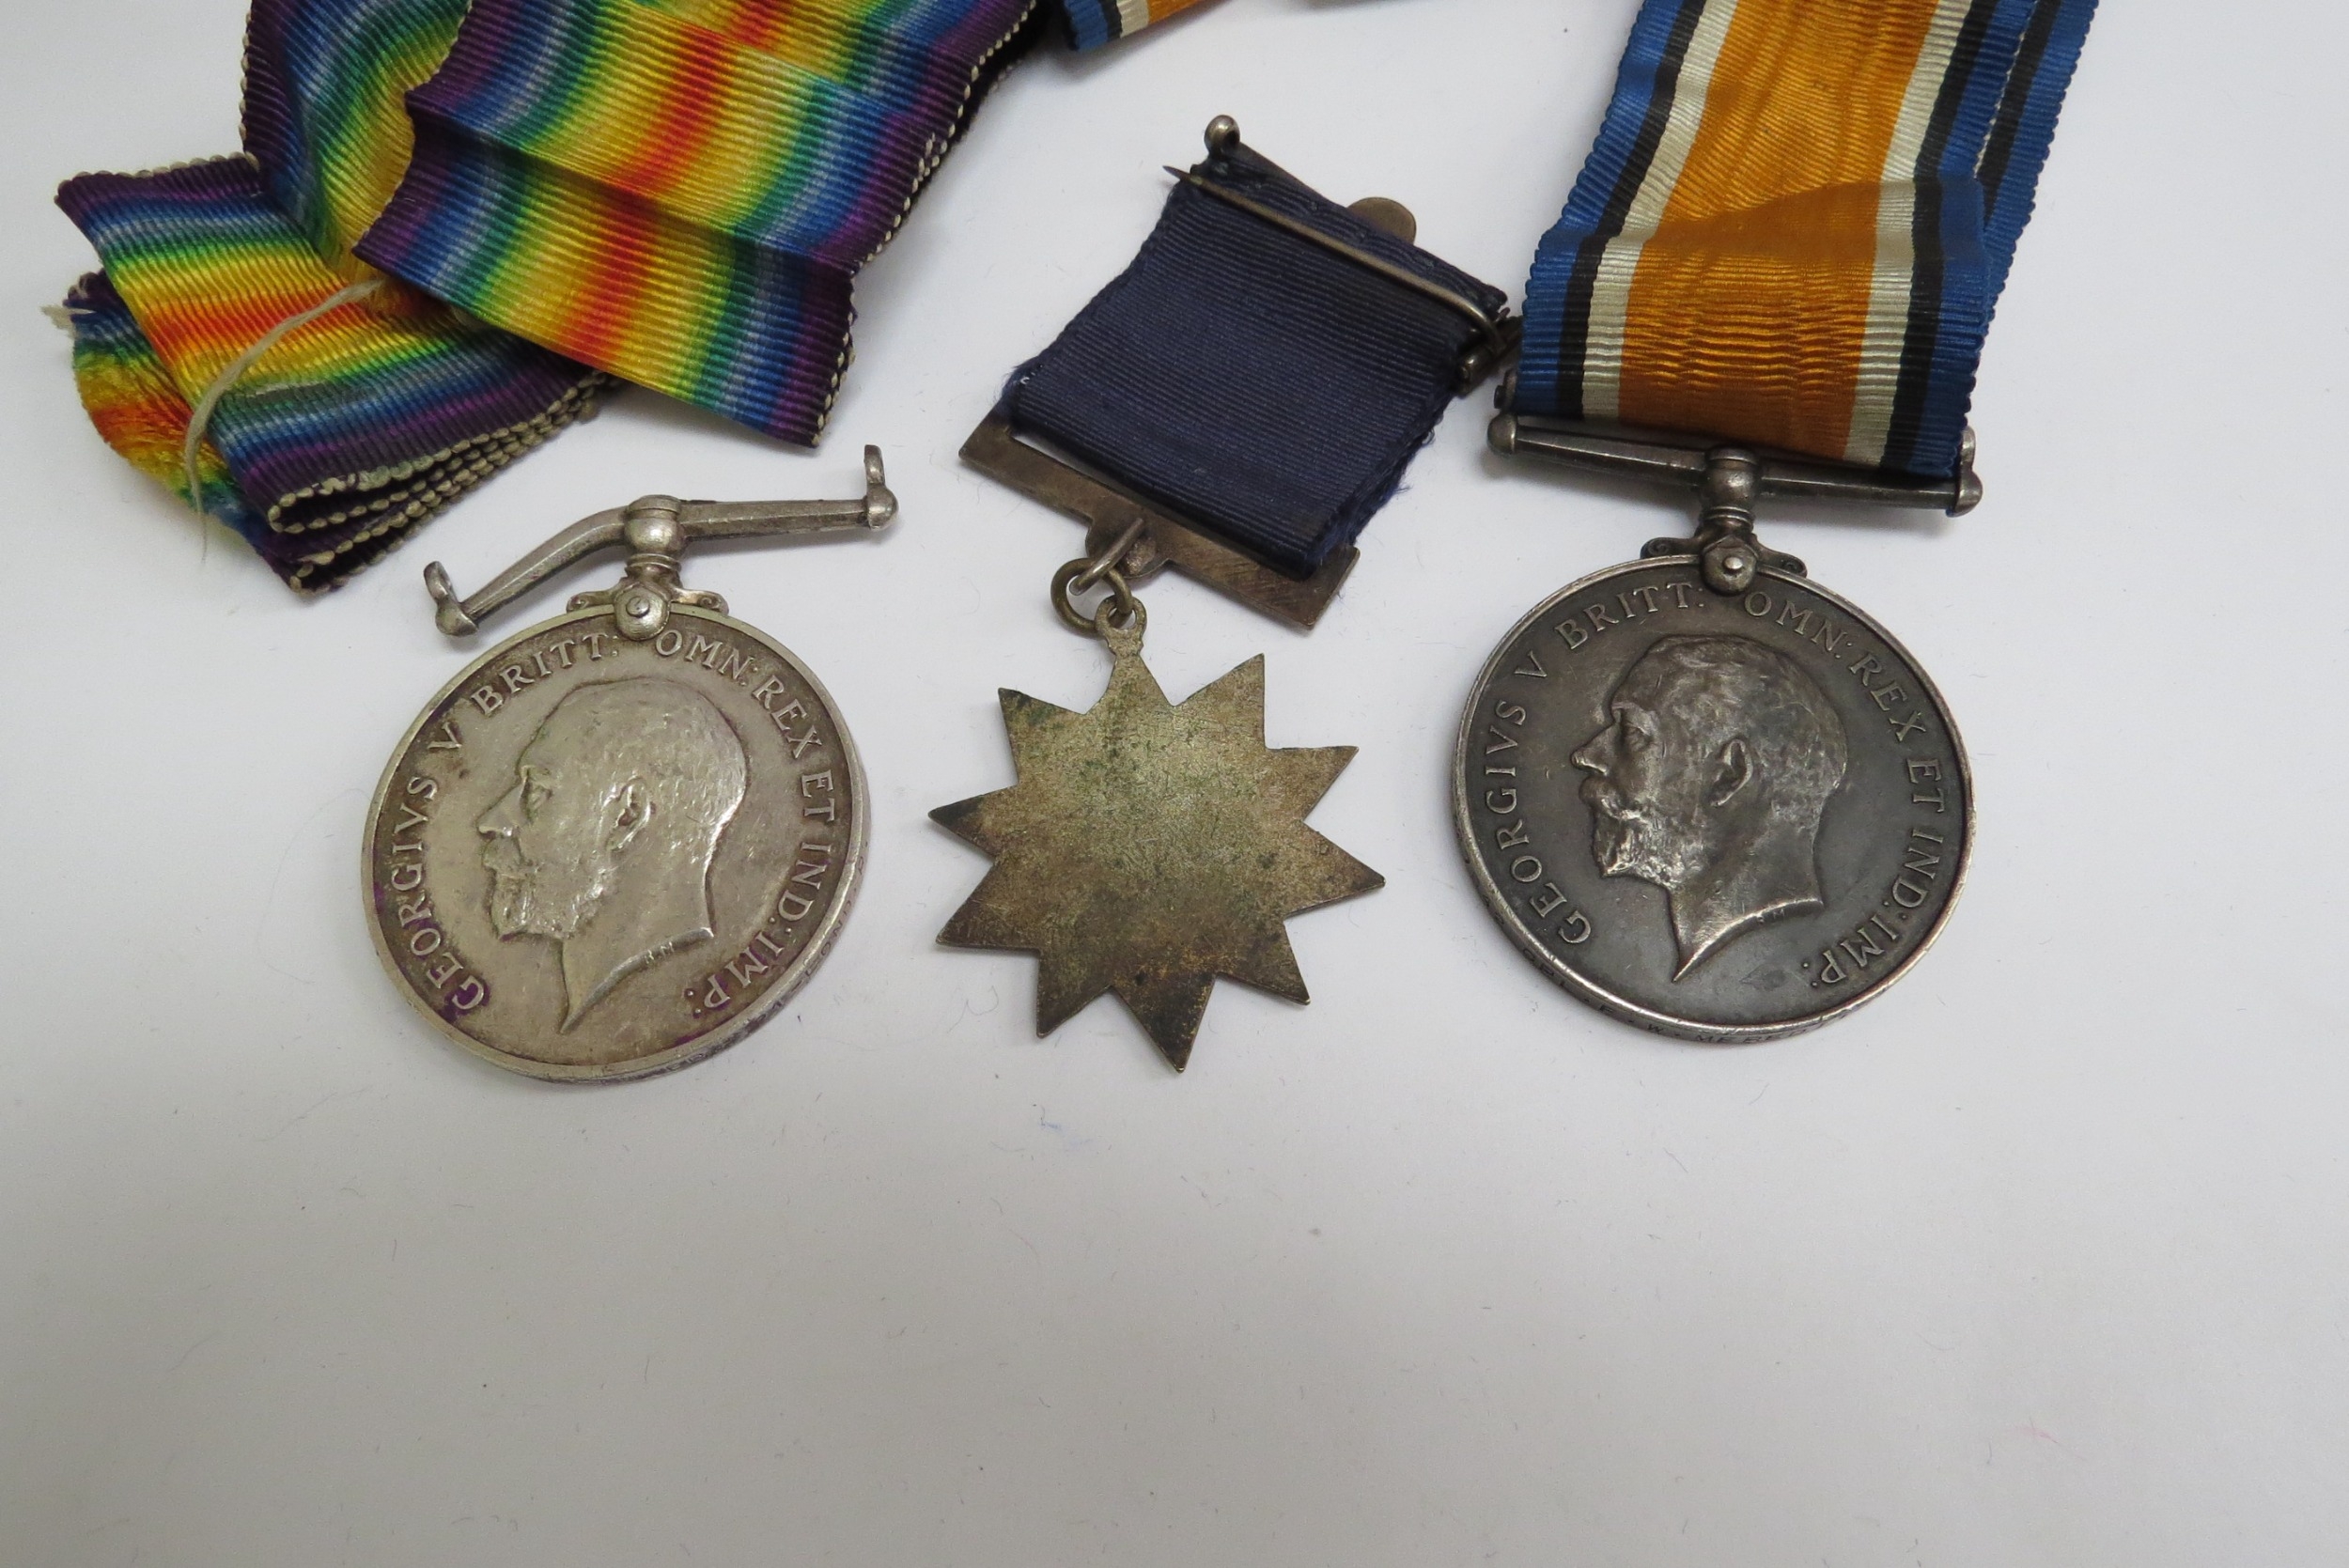 Two WWI War Medals named to S-327642 CPL. F.W. MEREDITH A.S.C. and 3975 PTE. H.H.L. PLANNER 21- - Image 2 of 3